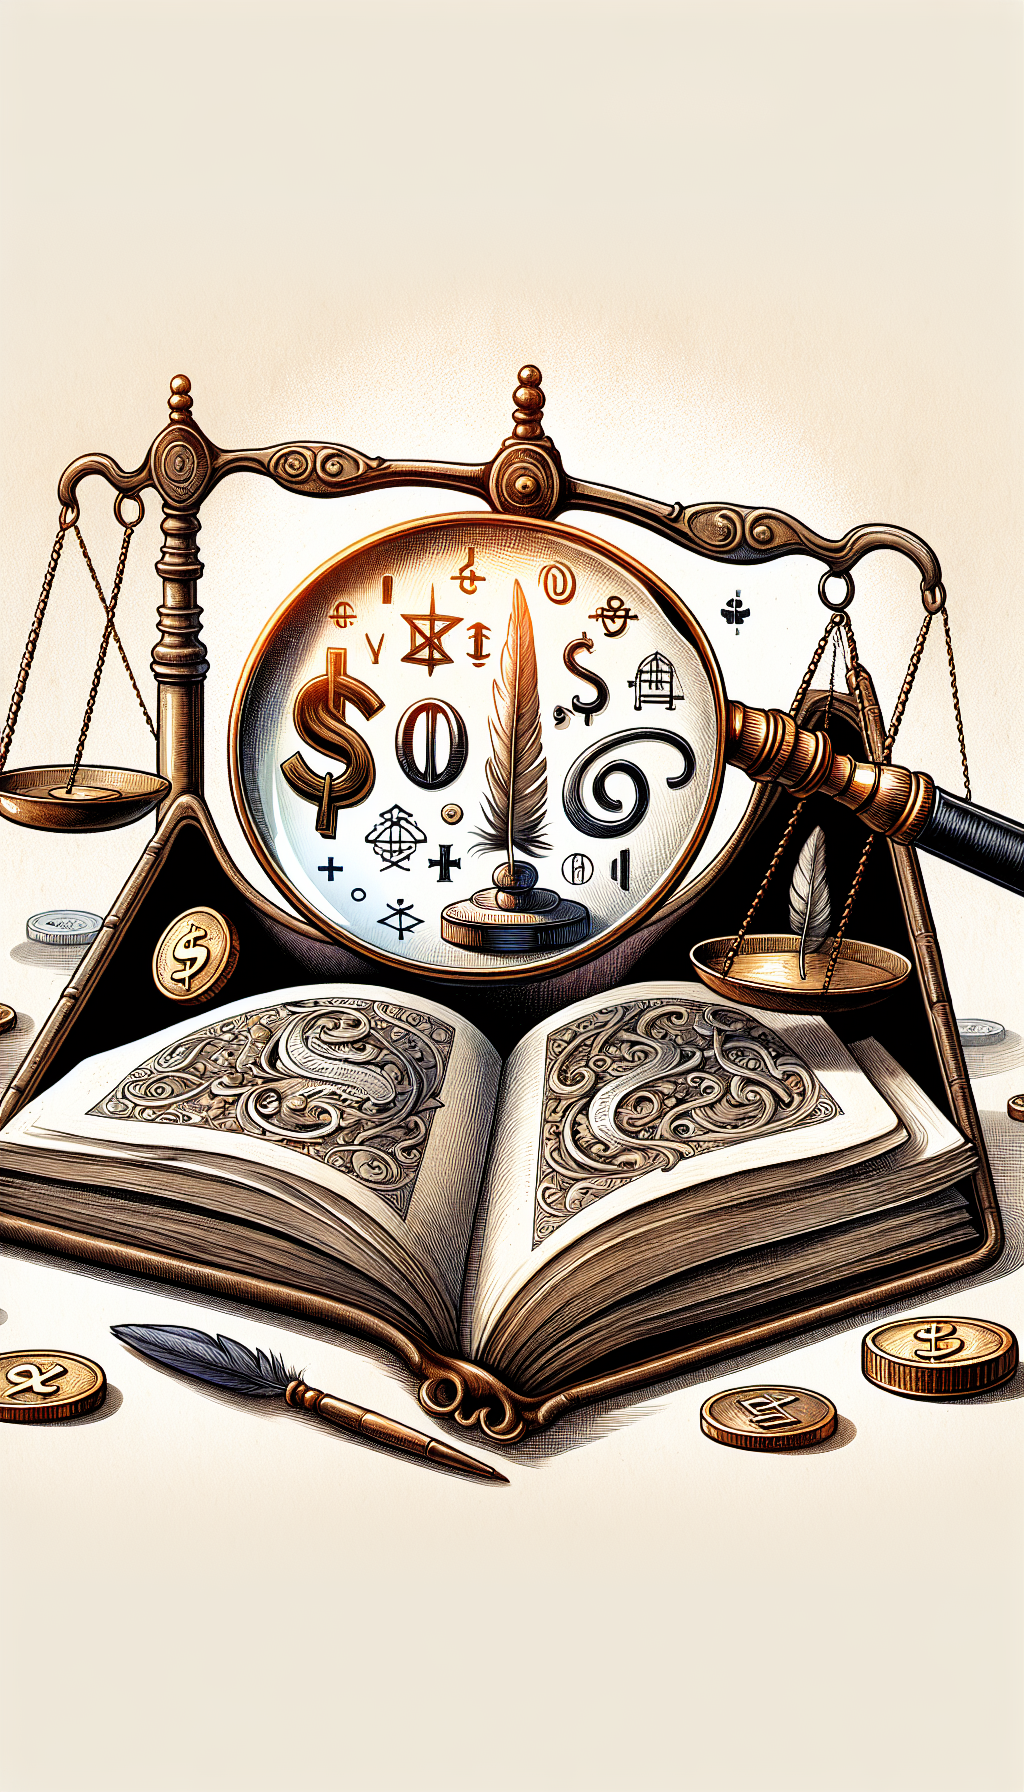 An aged magnifying glass hovers over an open, ornate antique book, with visible rare symbols and dollar signs subtly emerging from the pages. Beside it, a balance scale weighs a feather against a coin, symbolizing the delicate interplay of rarity and demand in valuation. The styles randomly alternate between fine line art for the symbols and watercolor textures for the book and instruments.